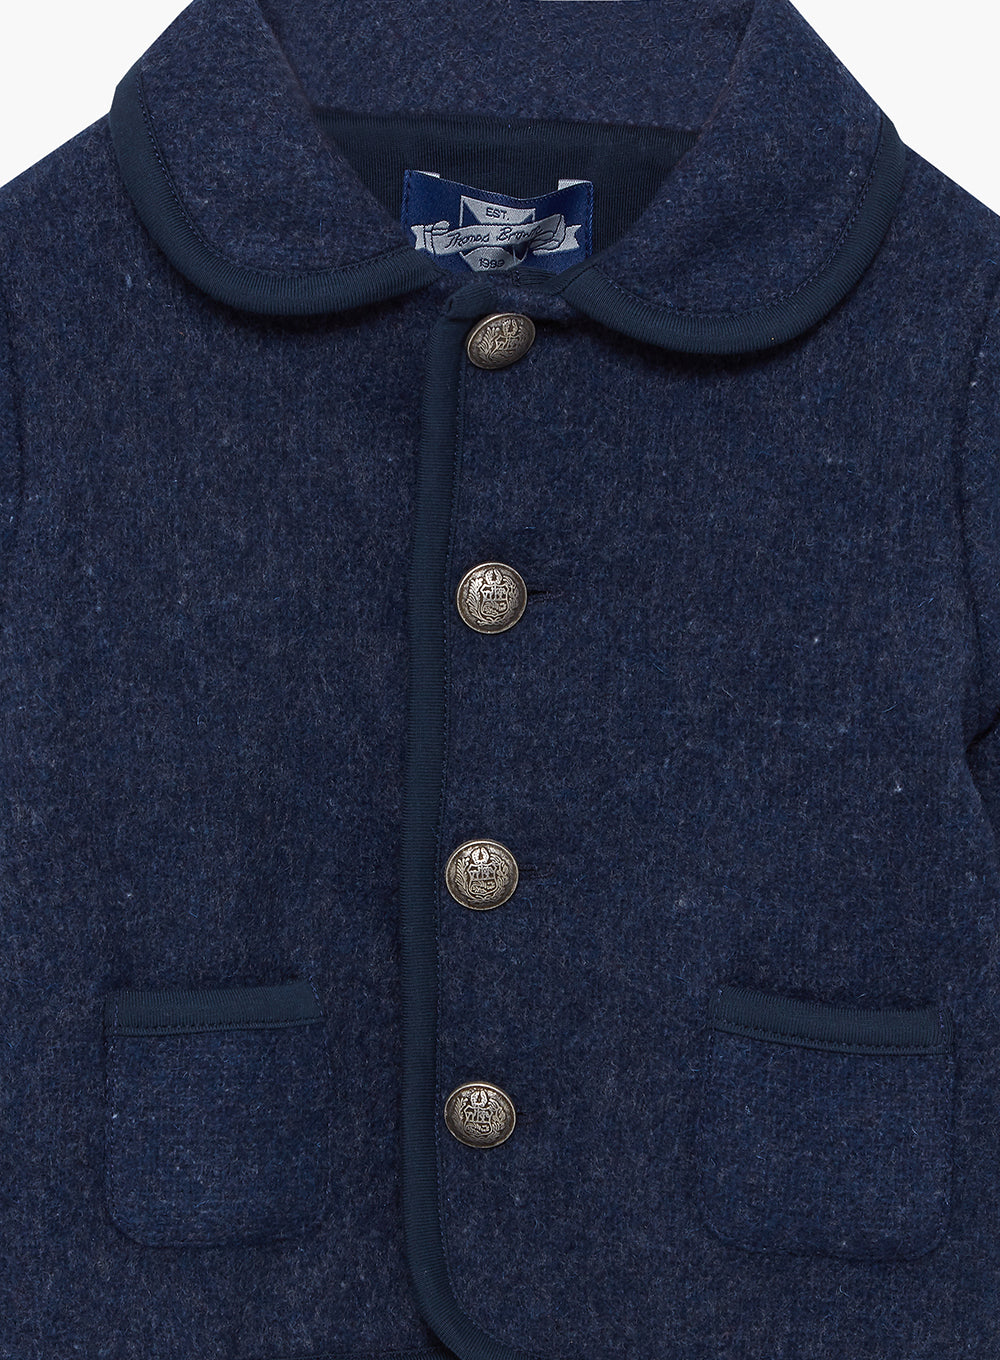 Harrison Jacket in French Navy